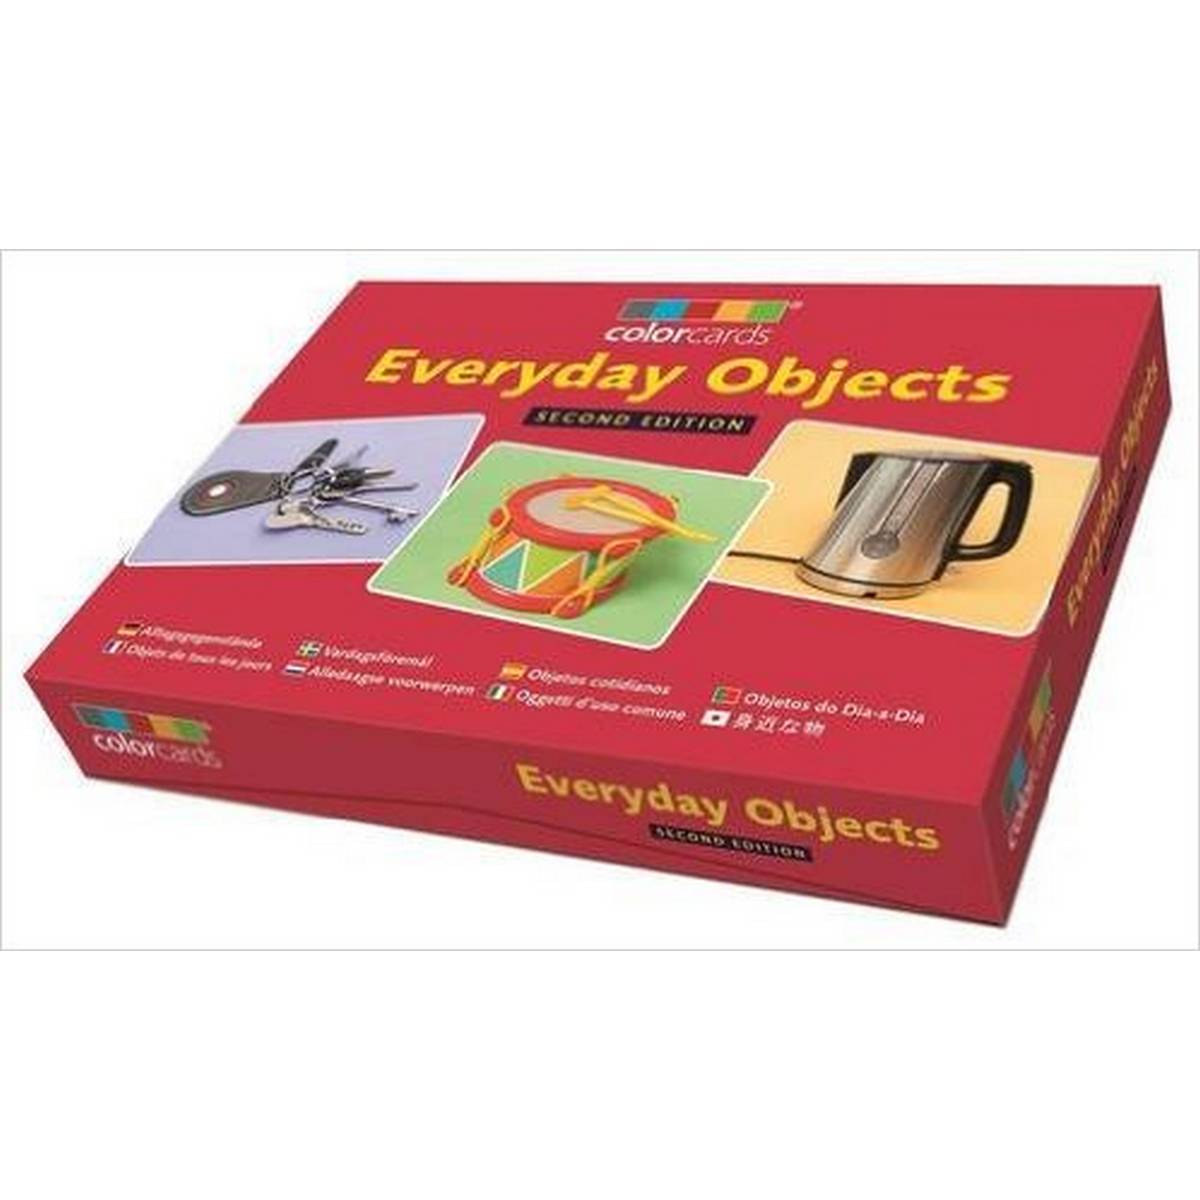 Colorcards: Everyday Objects (2nd Edition)